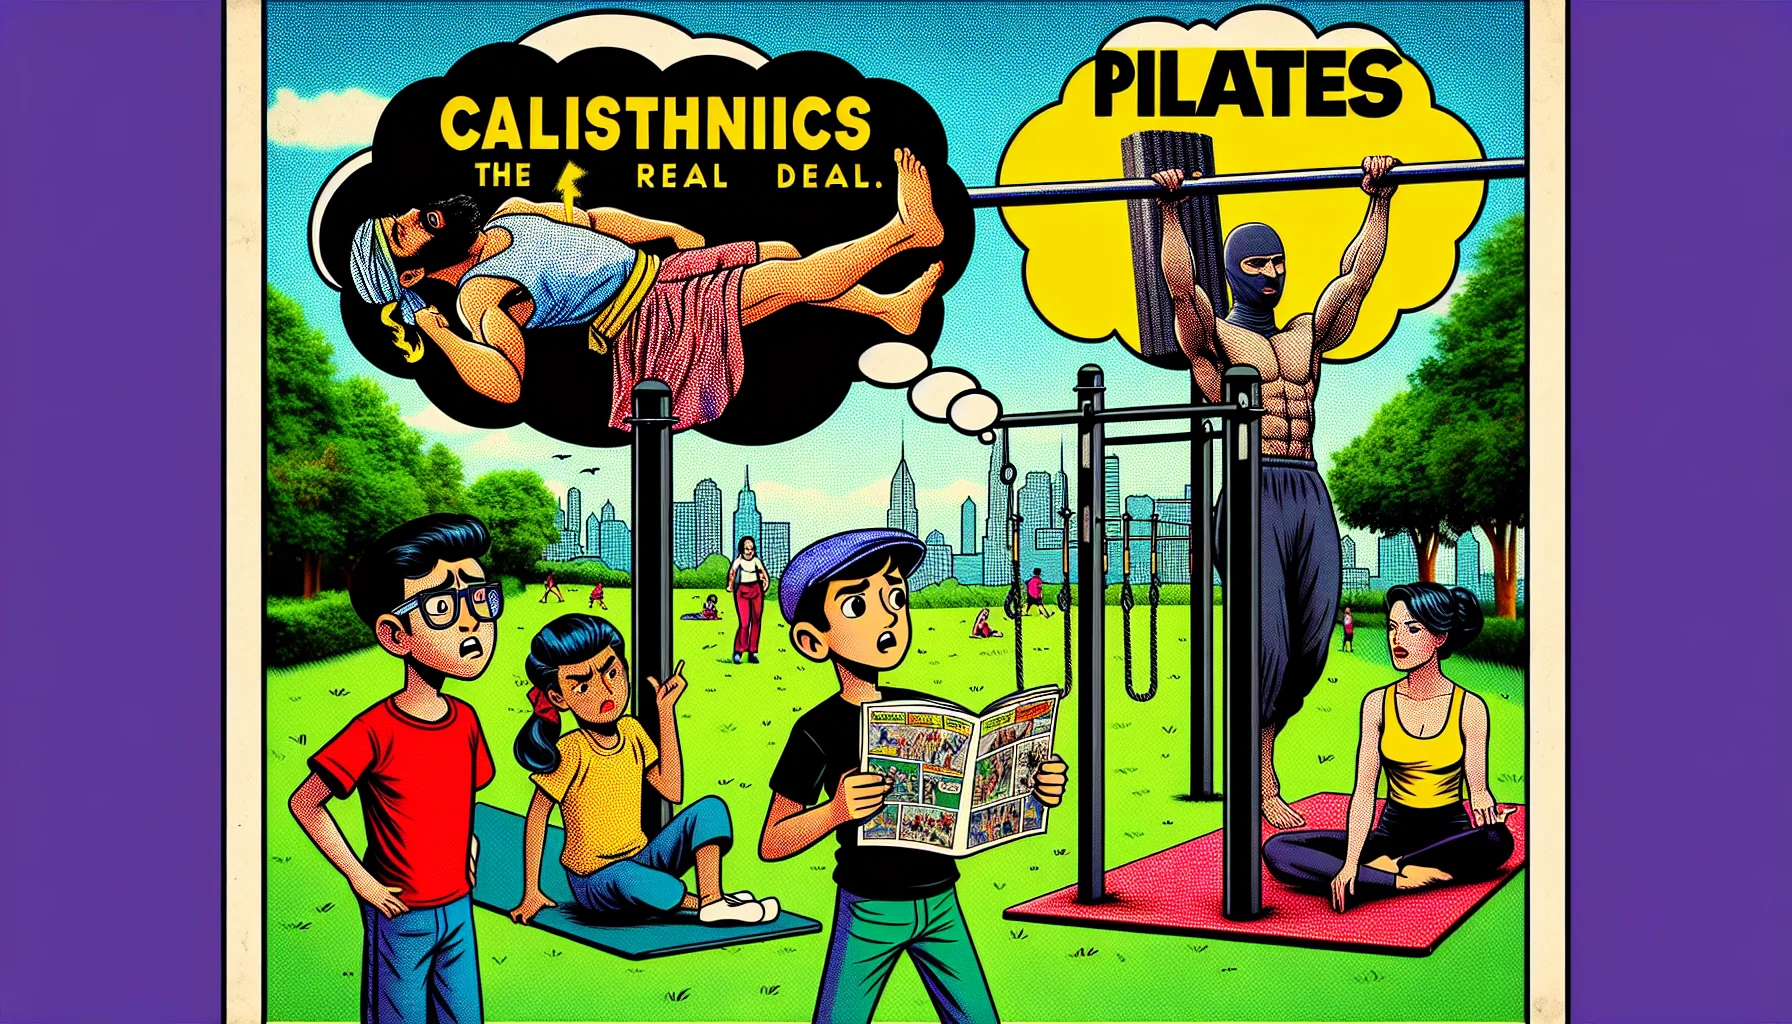 Generate a humorously captivating image showcasing the contrast between calisthenics and pilates. There is a lively park scene: on one side, a Middle-Eastern man is powerfully performing pull-ups on a bar, his face strained in concentration. His t-shirt humorously says 'Calisthenics, the Real Deal.' On the other side, a Caucasian woman is elegantly displaying a perfect pilates stance on her mat, with controlled and precise movements and her t-shirt stating 'Pilates Power.' There's a puzzled South Asian child in the middle, comic book in hand, wonderstruck at deciding which exercise method to choose.